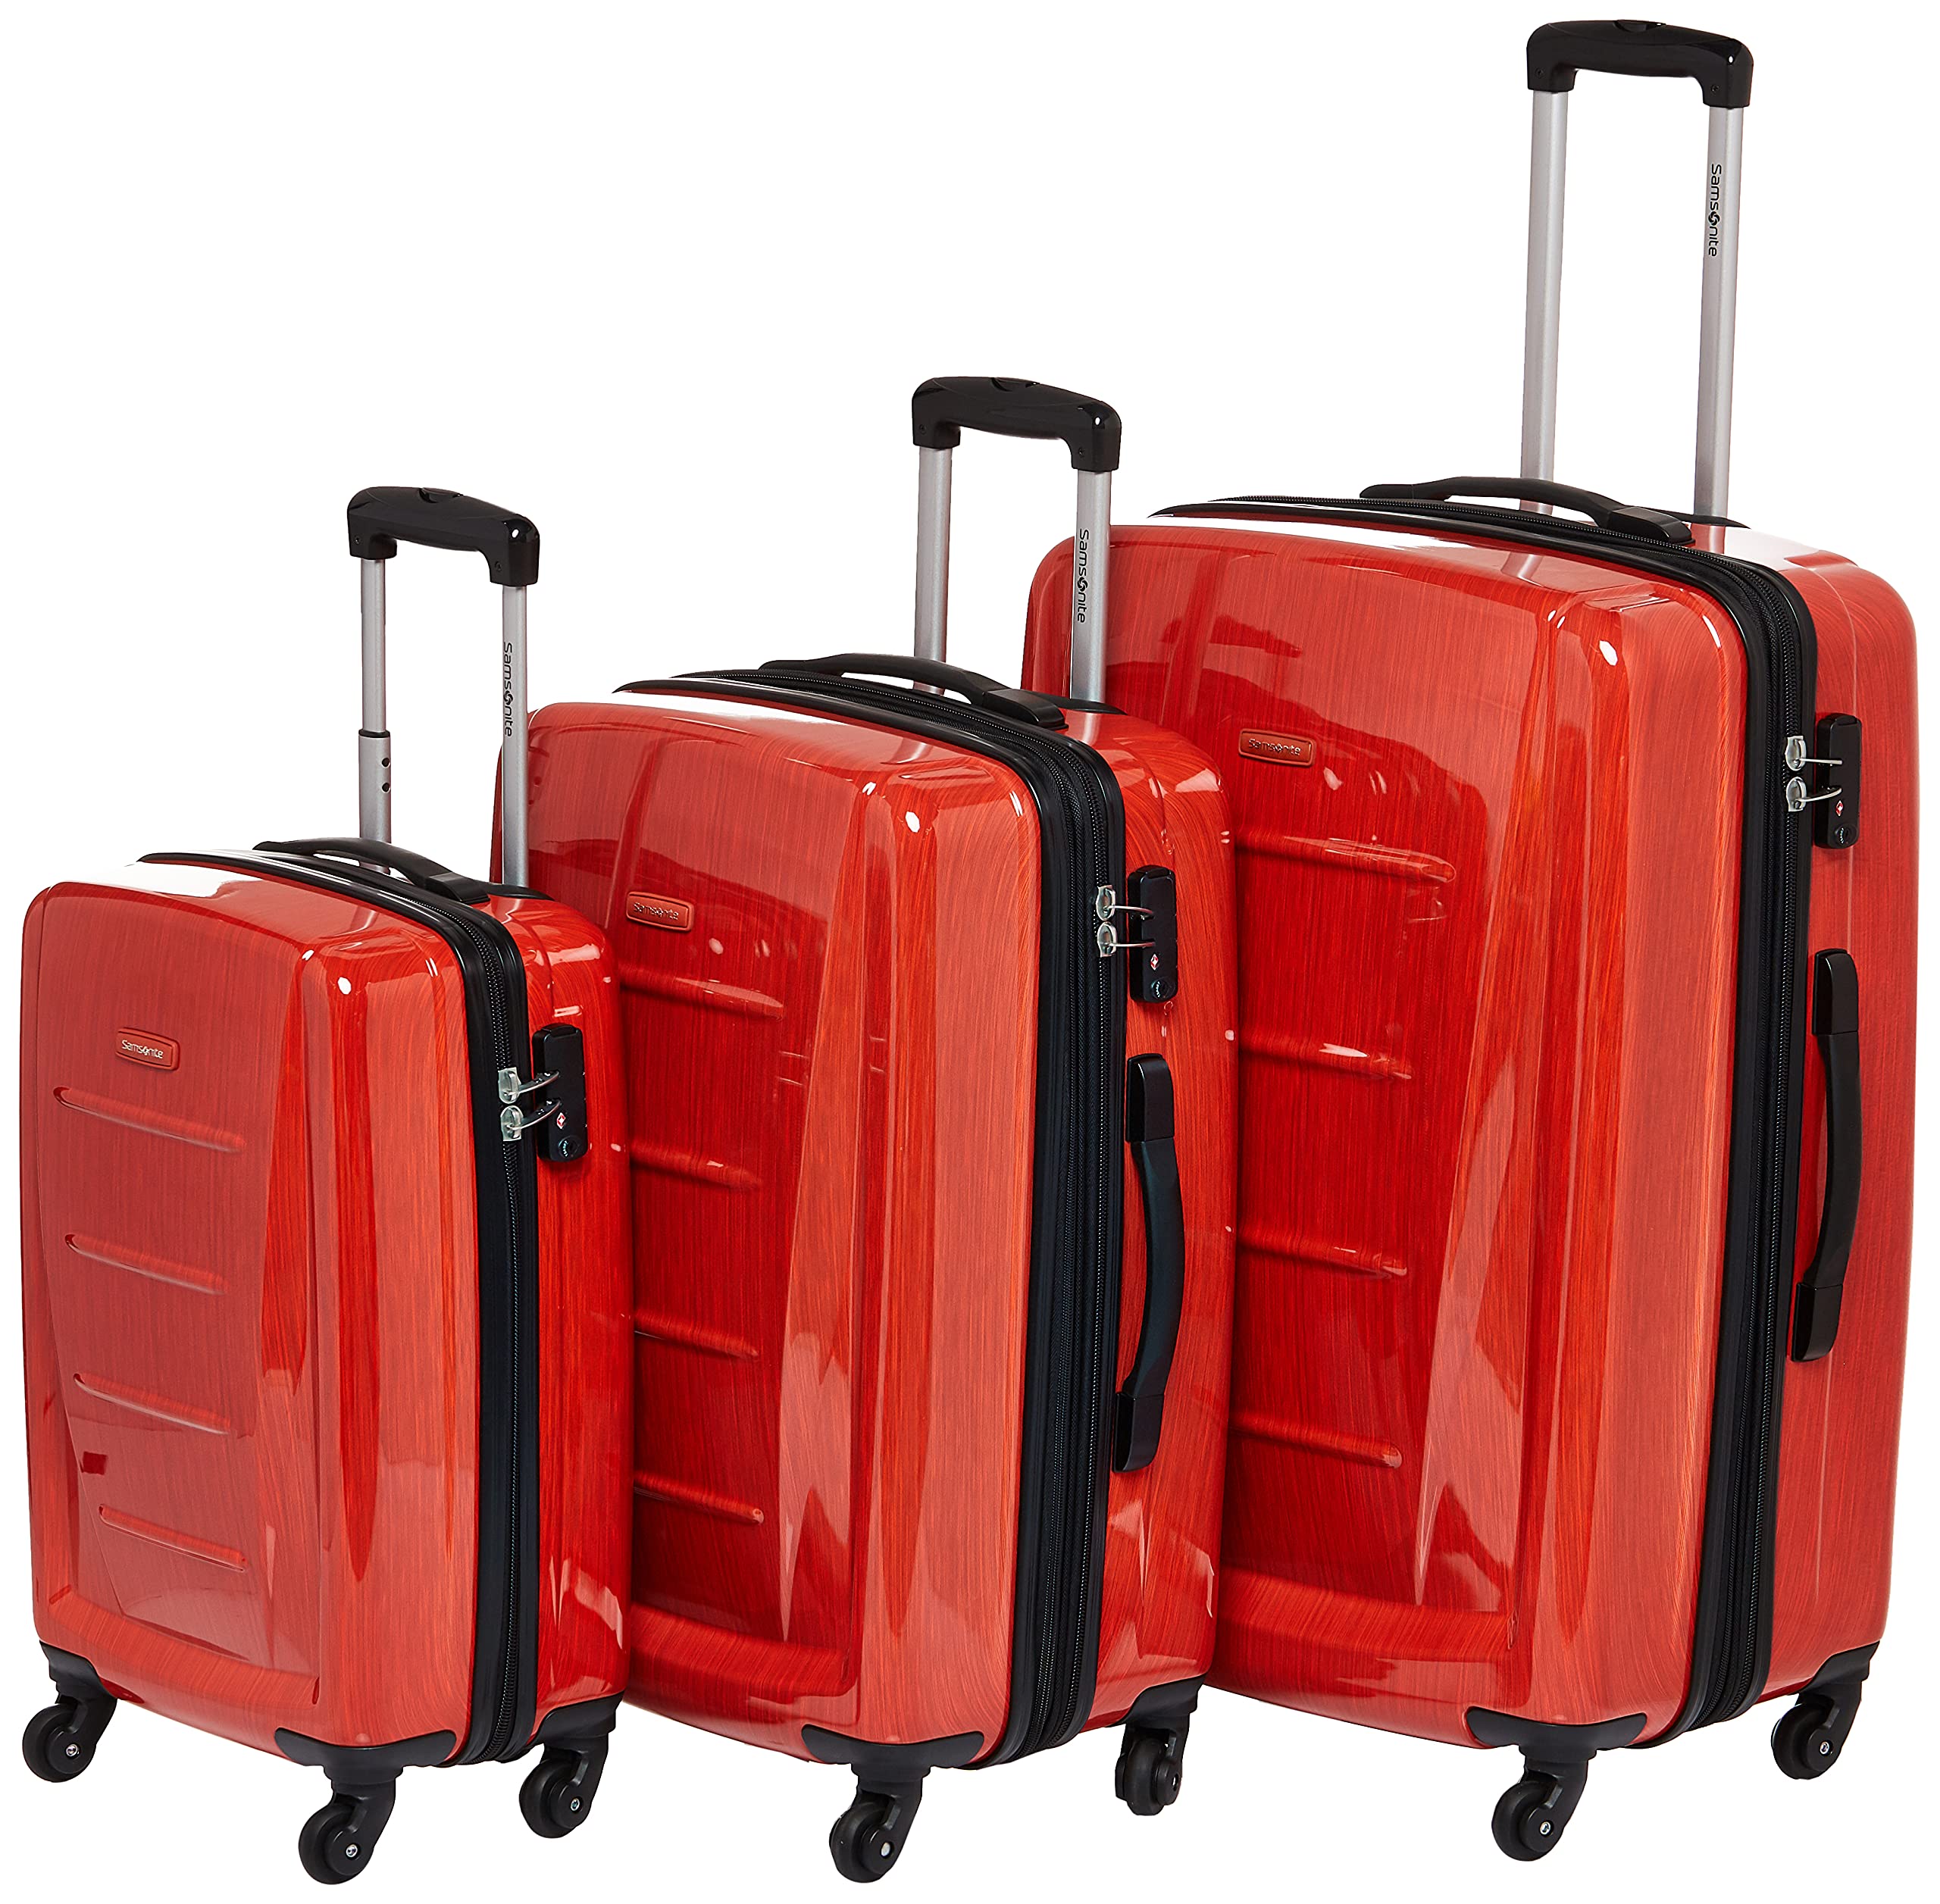 Samsonite Winfield 2 Hardside Luggage 3-Piece Set (20/24/28) for $231.62 + Free Shipping